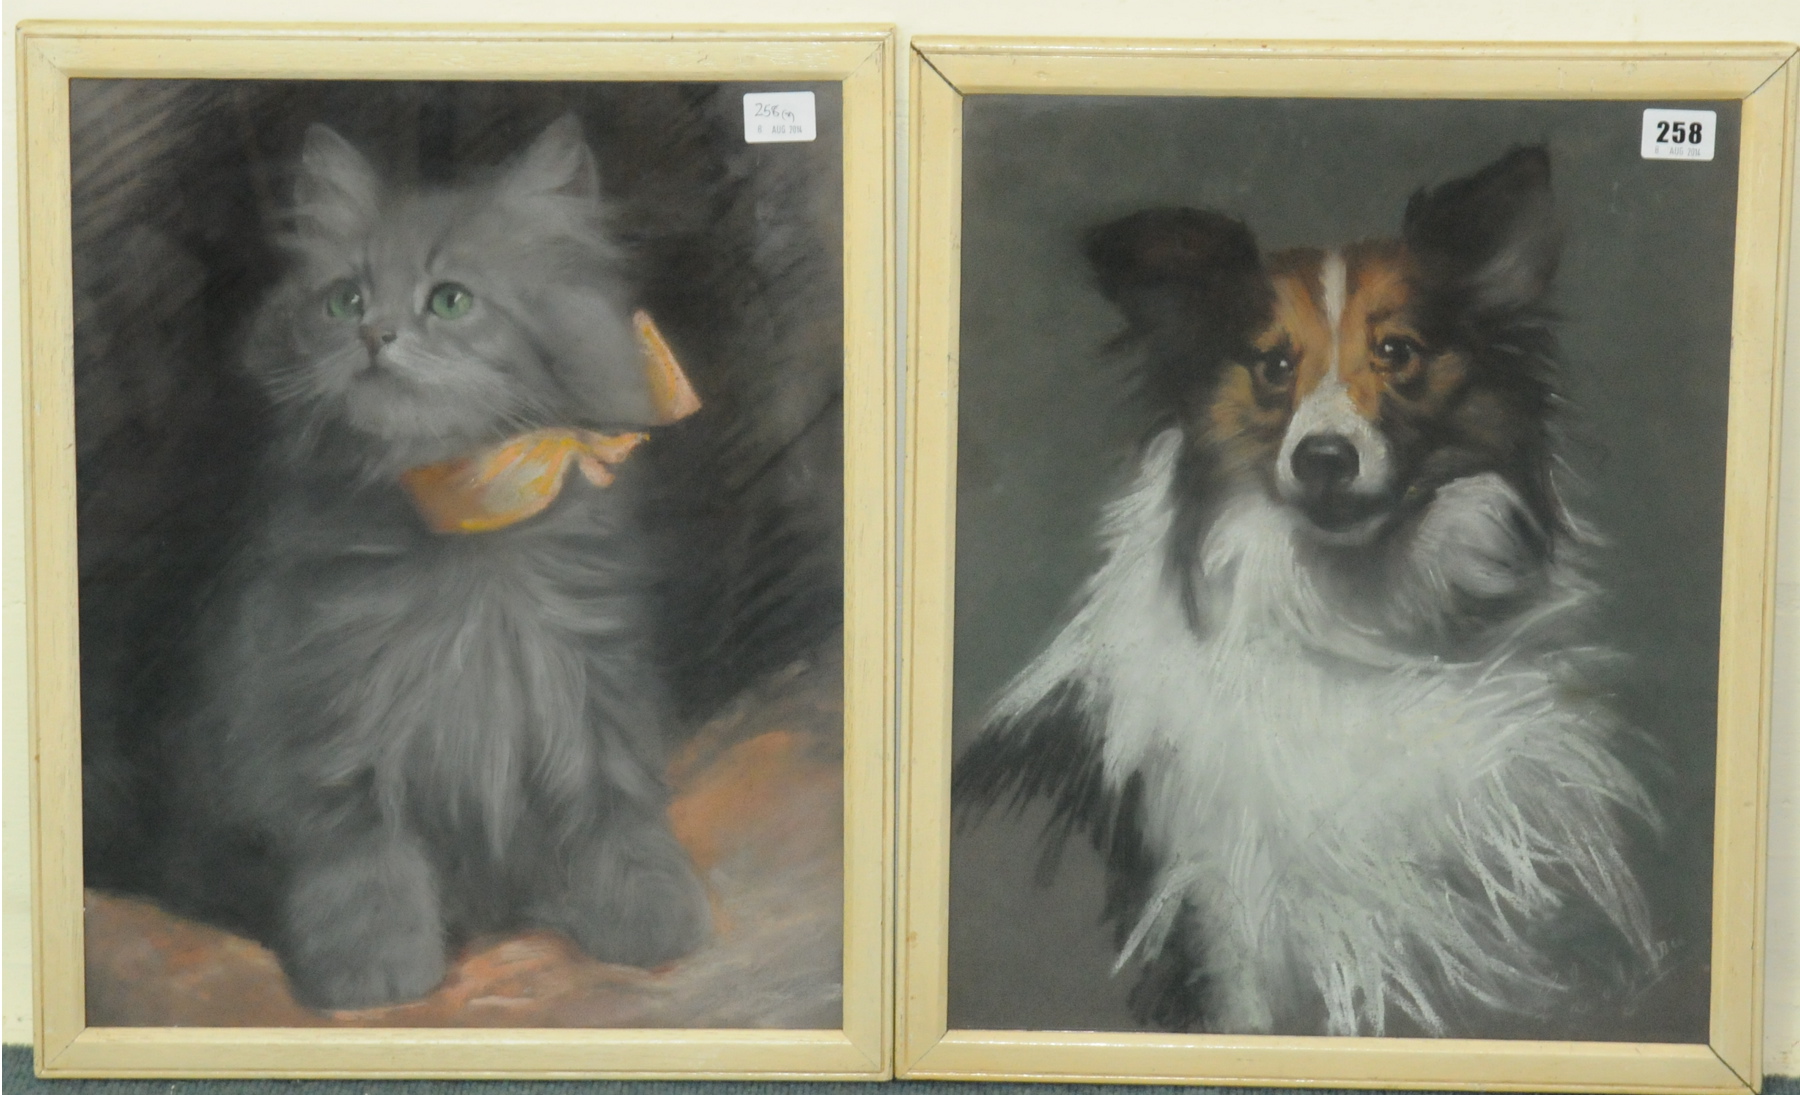 PATERSON.
Portraits of a Collie dog & a Persian cat - a pair.
Pastel. Each 17¼" x 13½.
One signed.